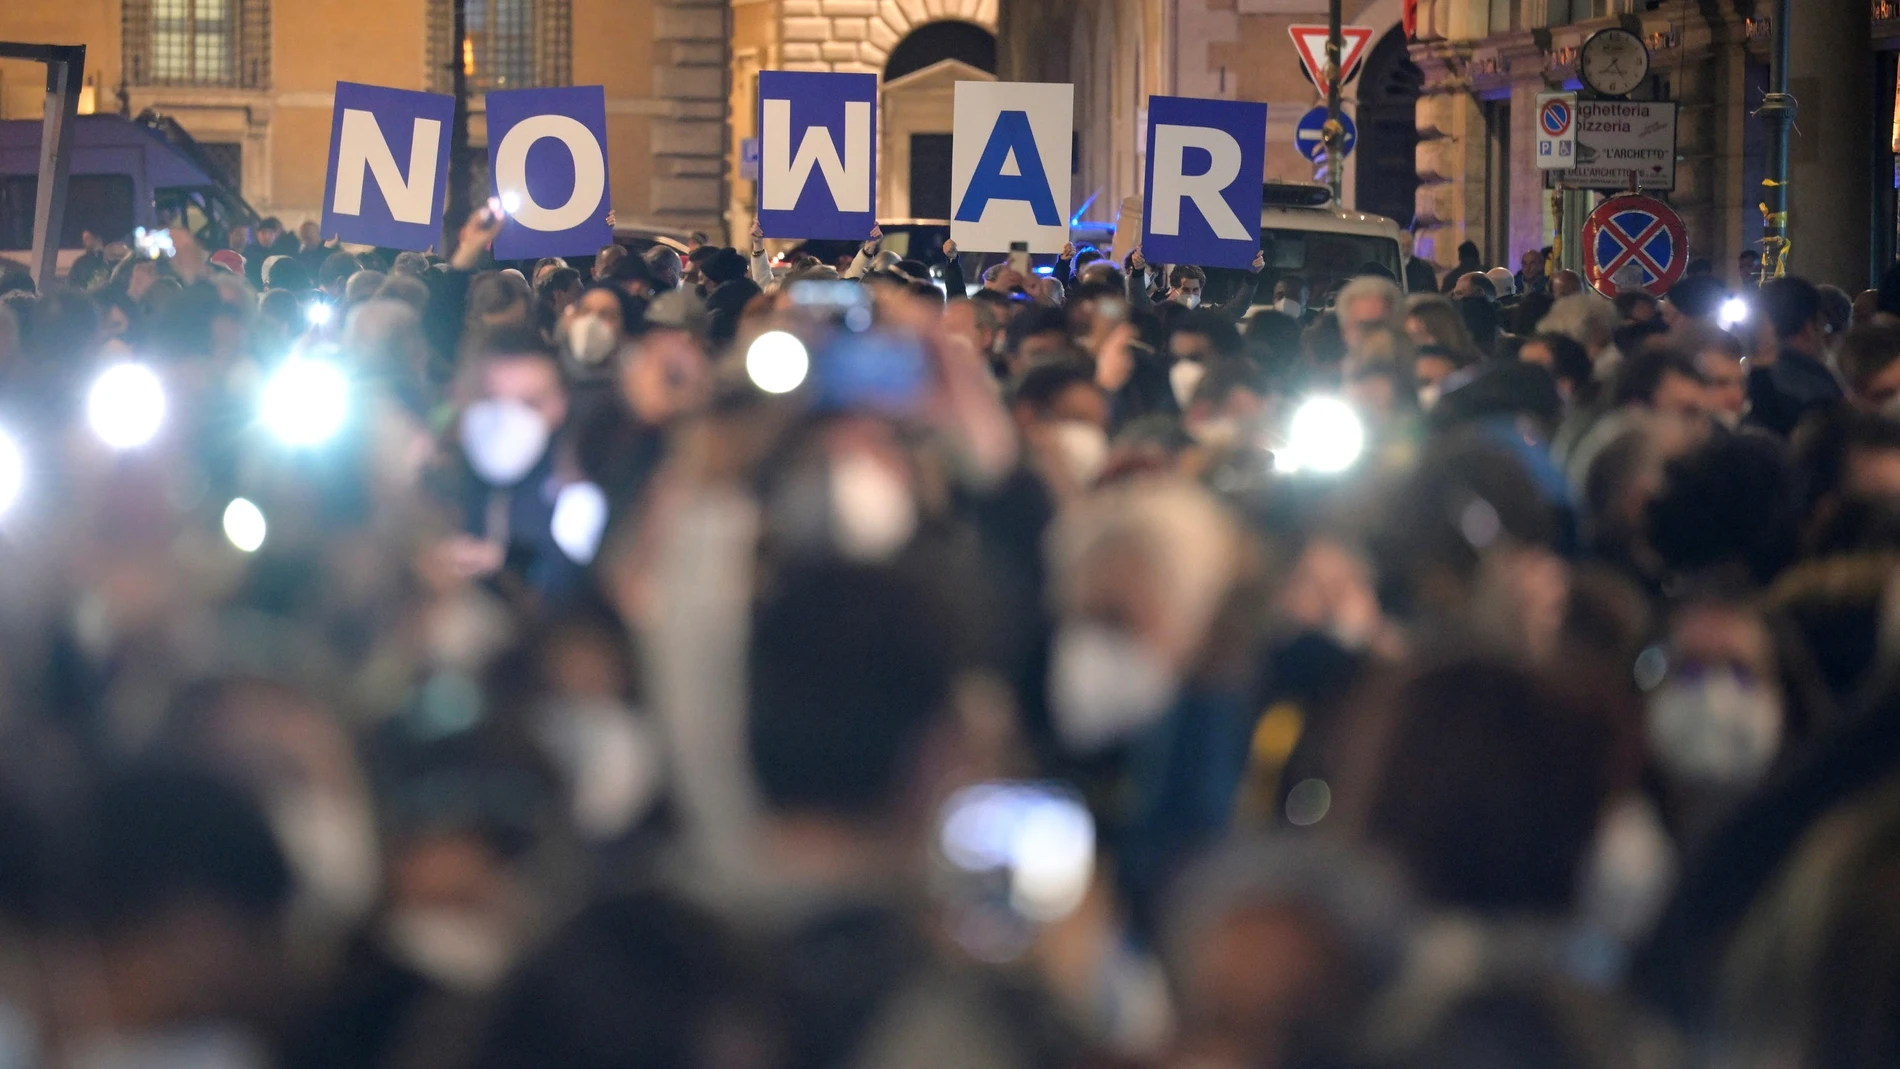 Demonstration 'Yes to peace, no to war' in Rome